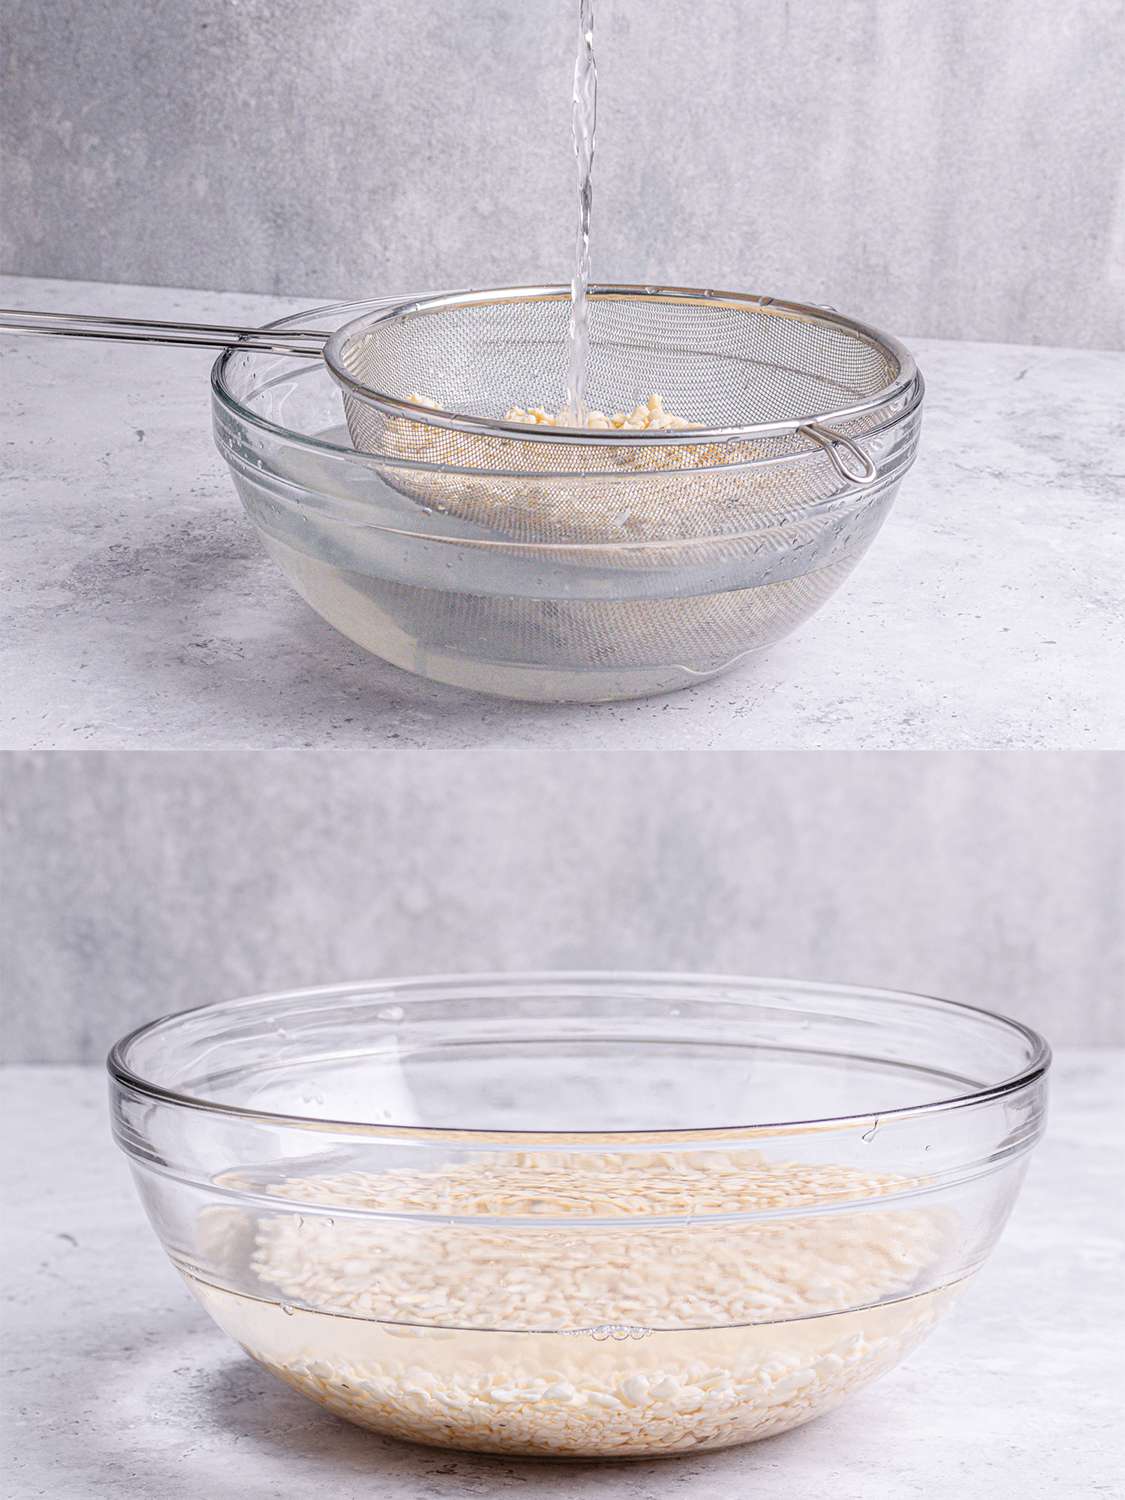 Two image collage. Top: Clean water being pour over the peas in a mess stainer. Bottom: peas in clear water in a clear bowl.